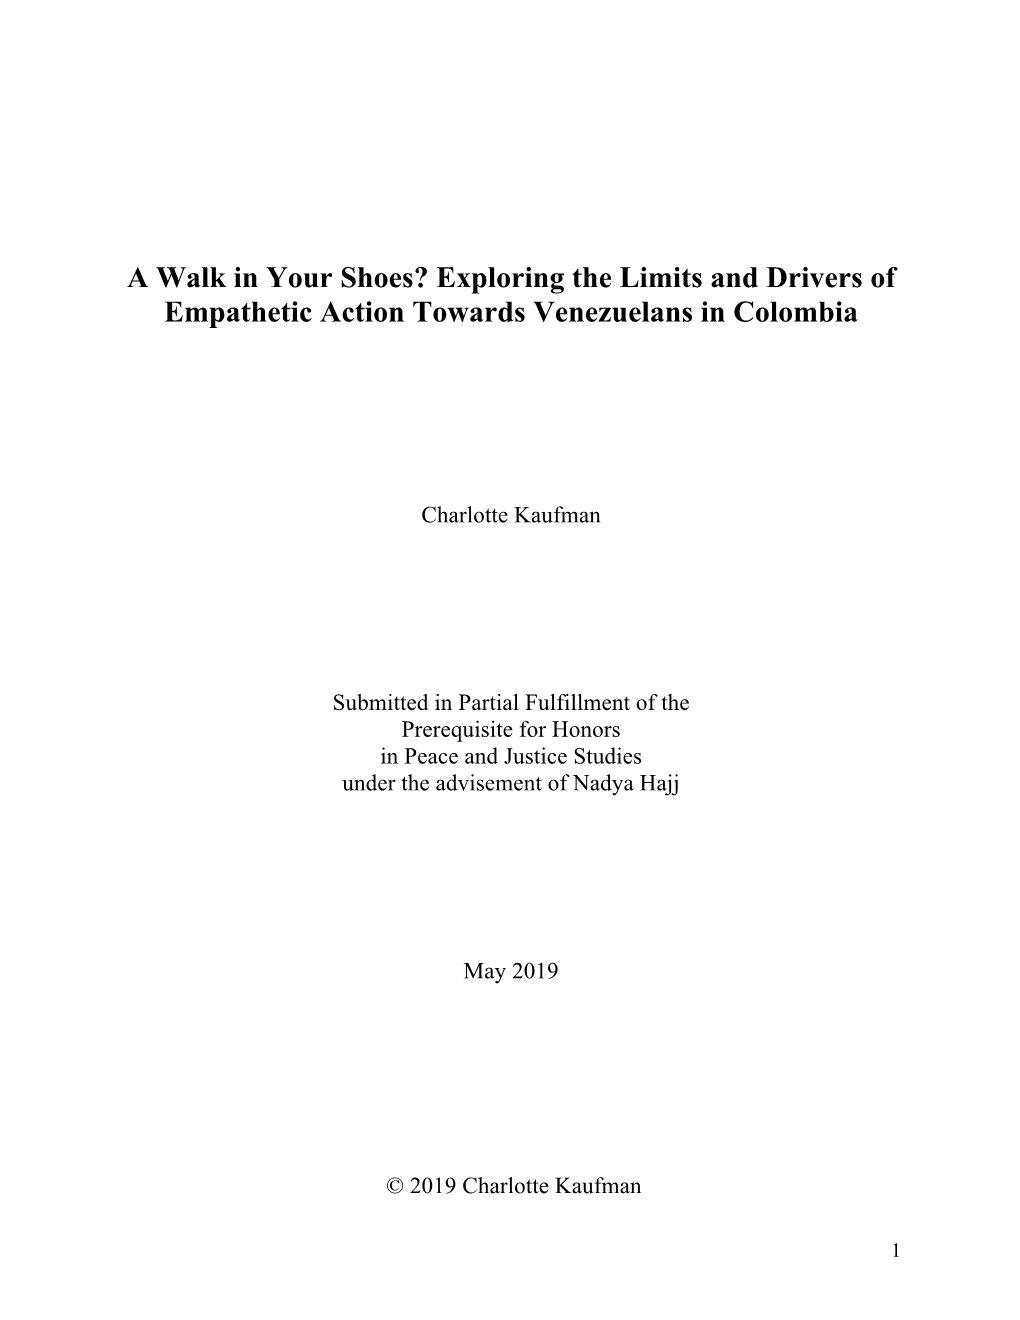 A Walk in Your Shoes? Exploring the Limits and Drivers of Empathetic Action Towards Venezuelans in Colombia